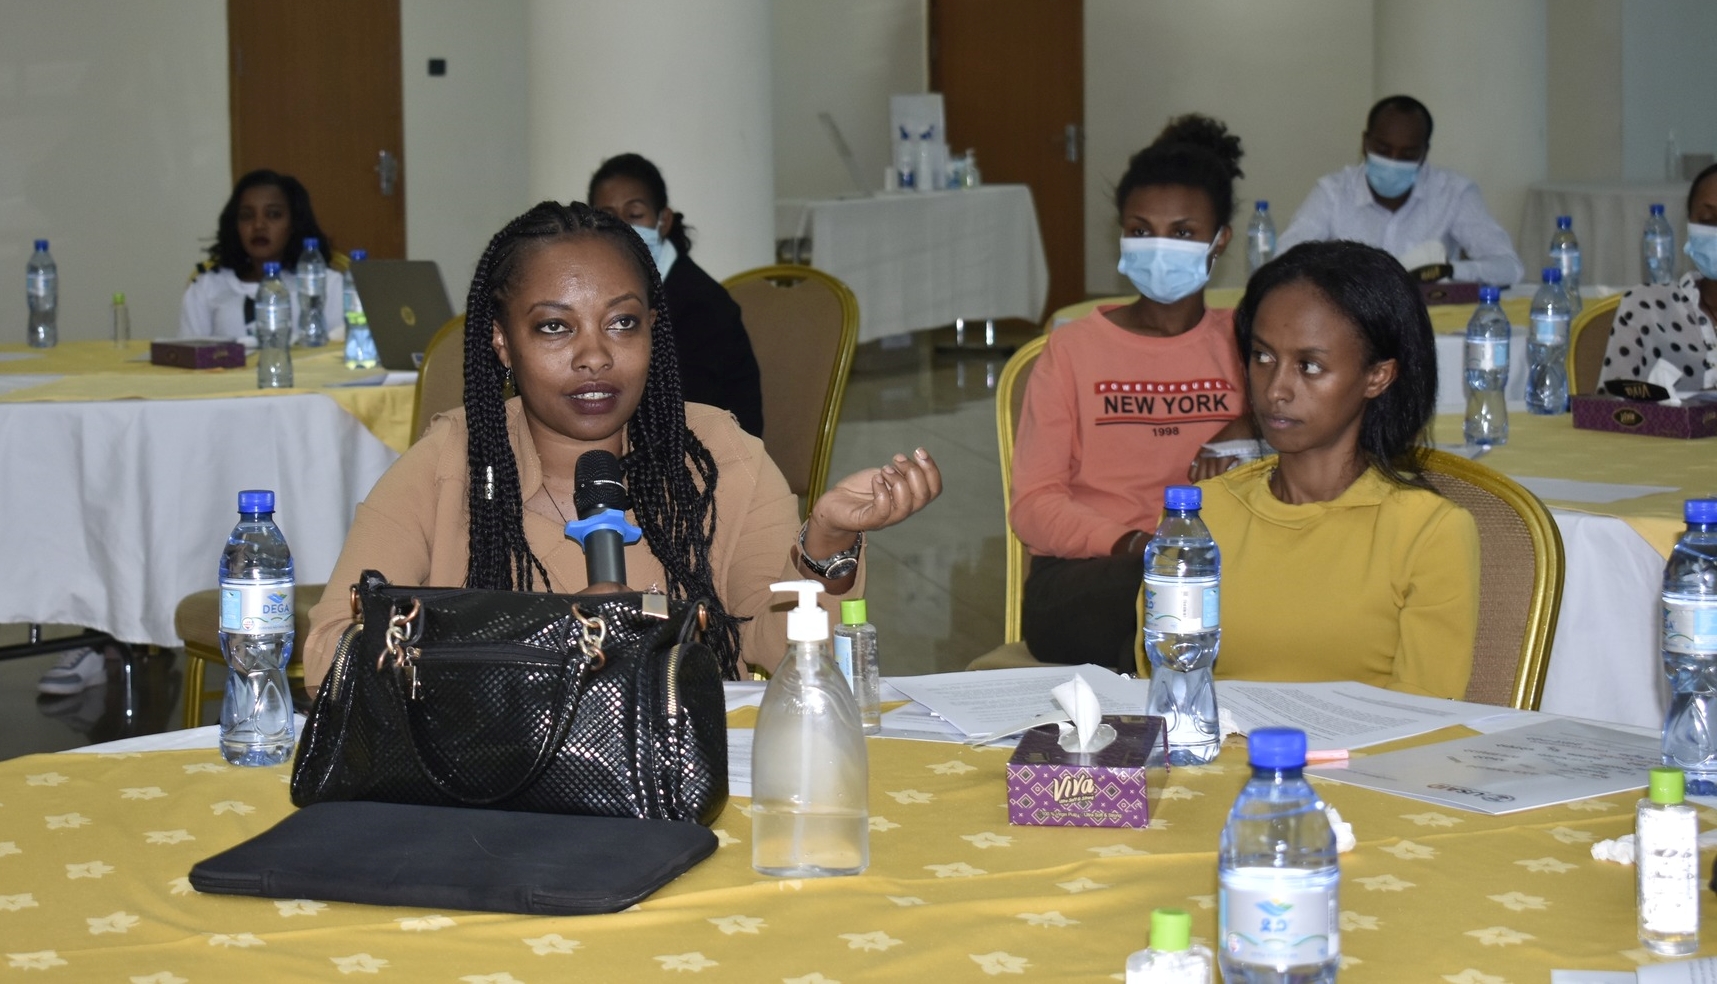 Awareness and Capacity Building to Prevent Gender-Based Violence in Ethiopia